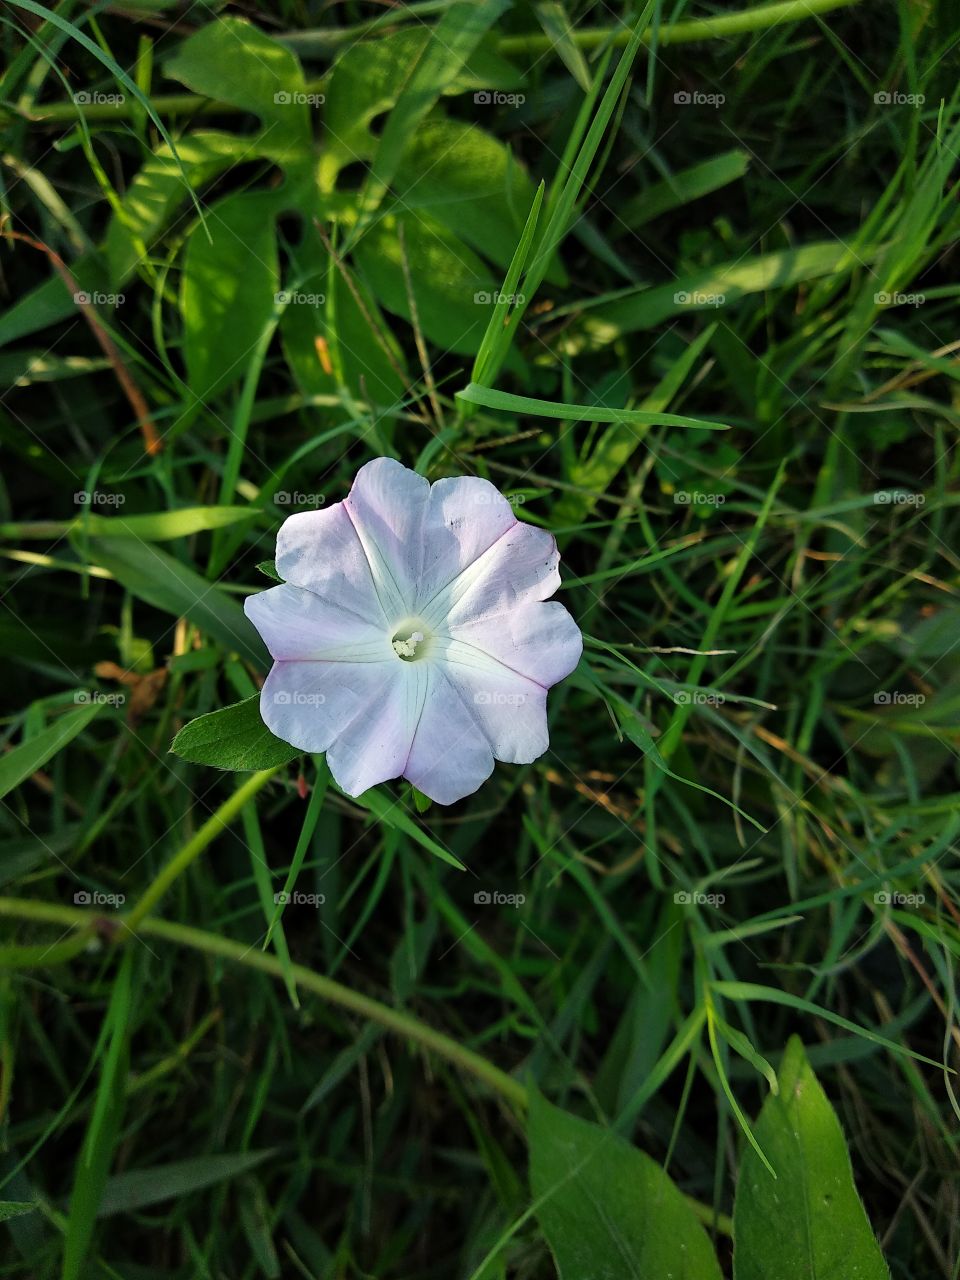 beautiful flower,beautiful rare flower in the nature,beautiful flower in the garden,flower blooming,flower blossom,rare flower in white colour.